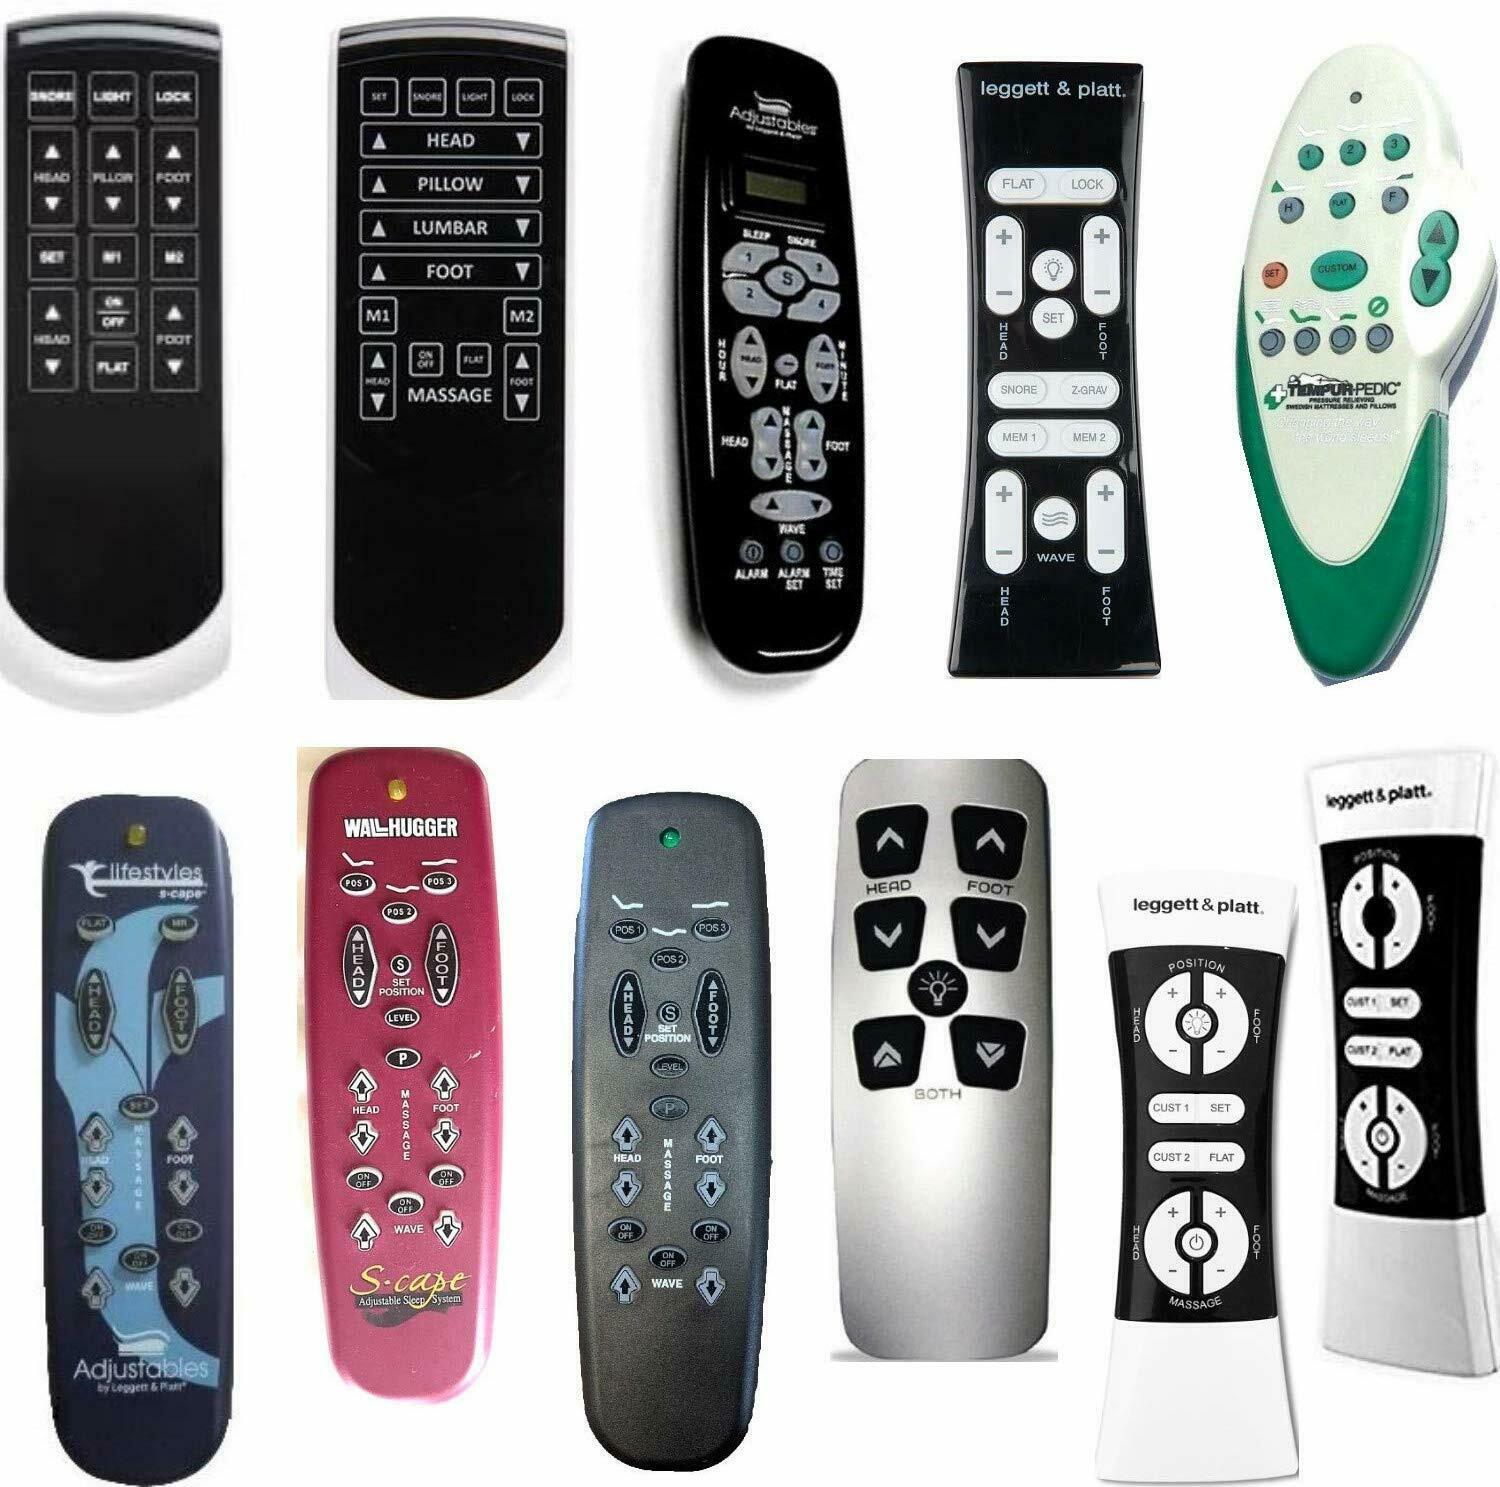 Leggett & Platt Replacement Adjustable Bed Remotes, All Models And Styles